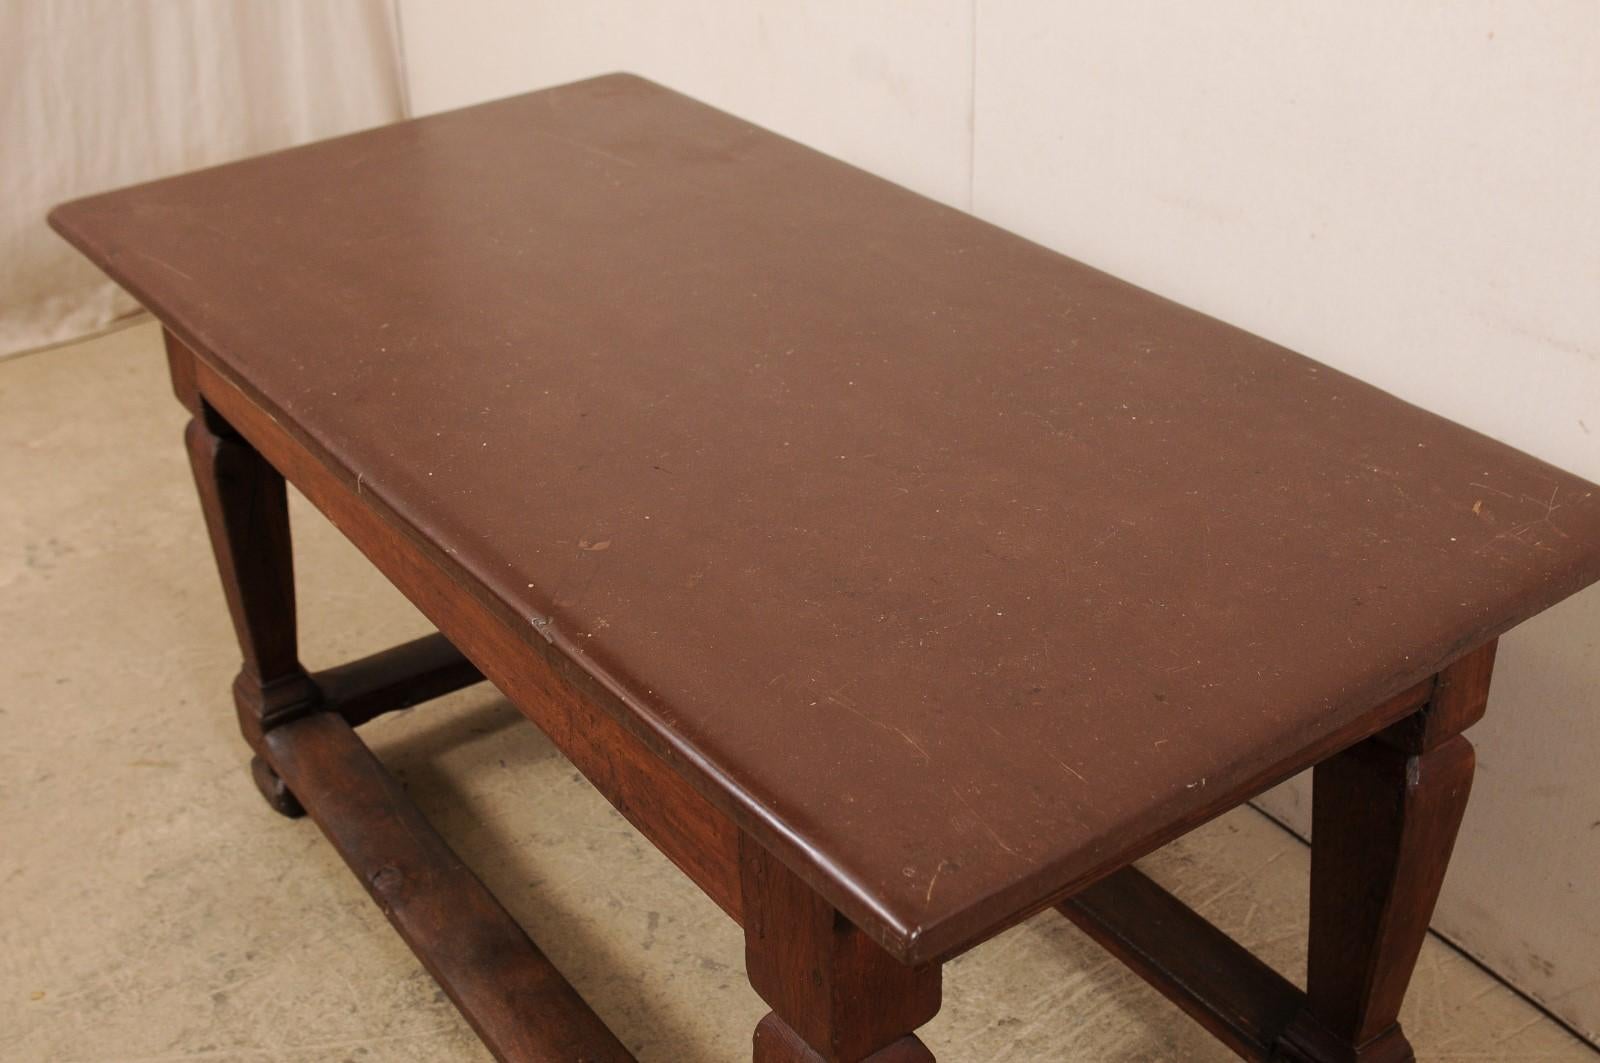 18th Century 18th C. Swedish Period Baroque Table w/Stone Top- A Great Kitchen Work Table! For Sale